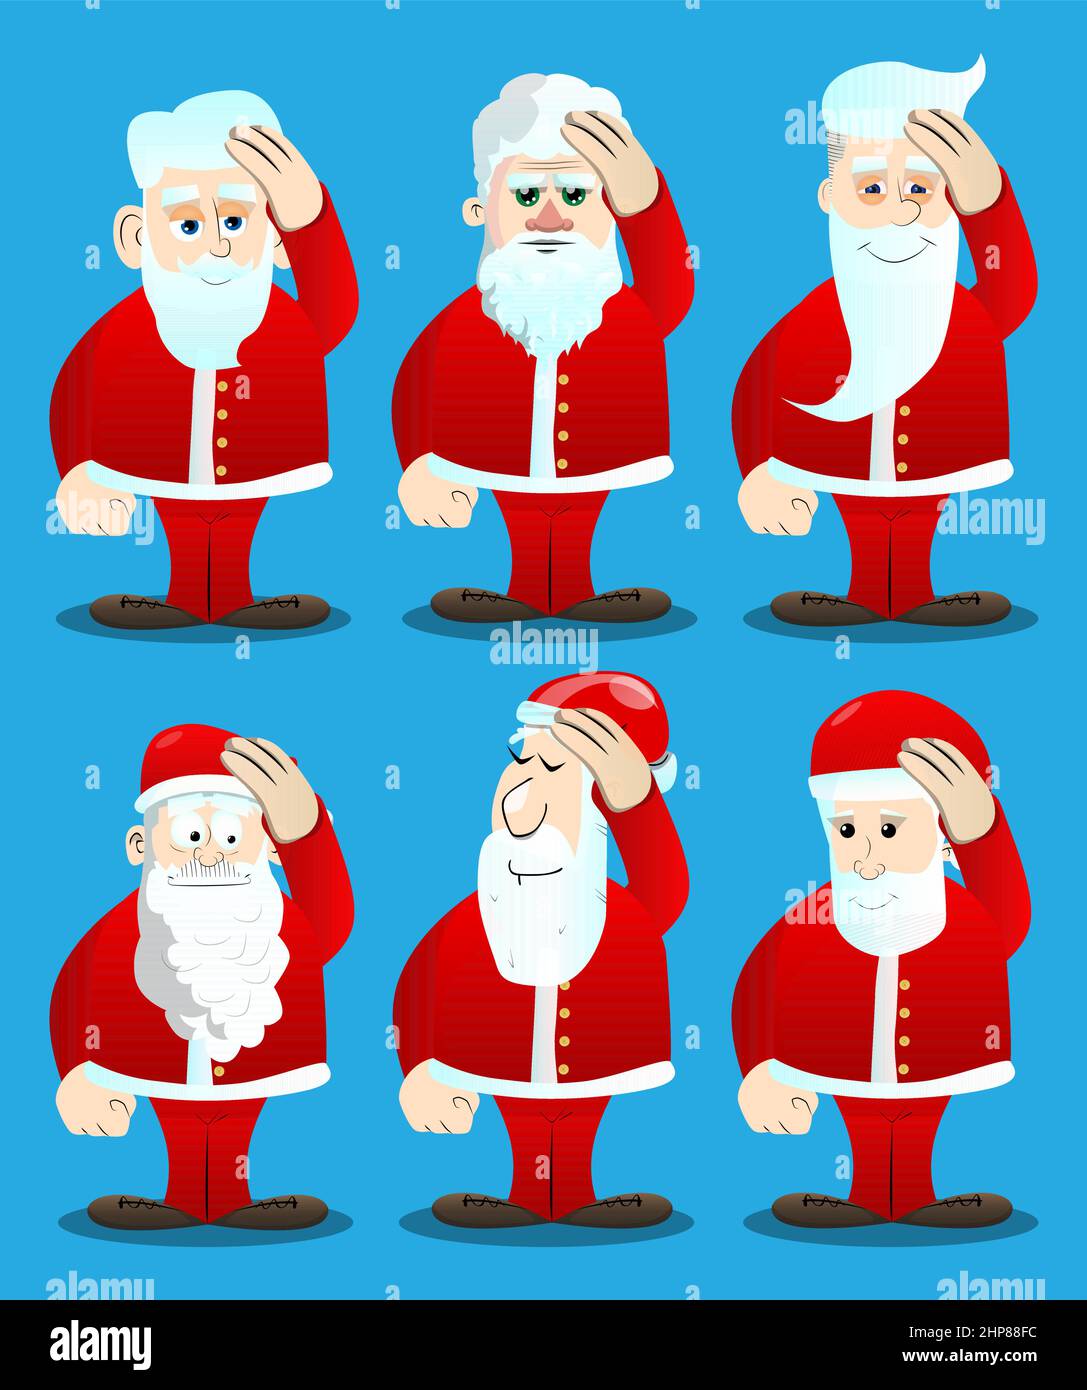 Santa Claus in his red clothes with white beard placing hand on head. Stock Vector